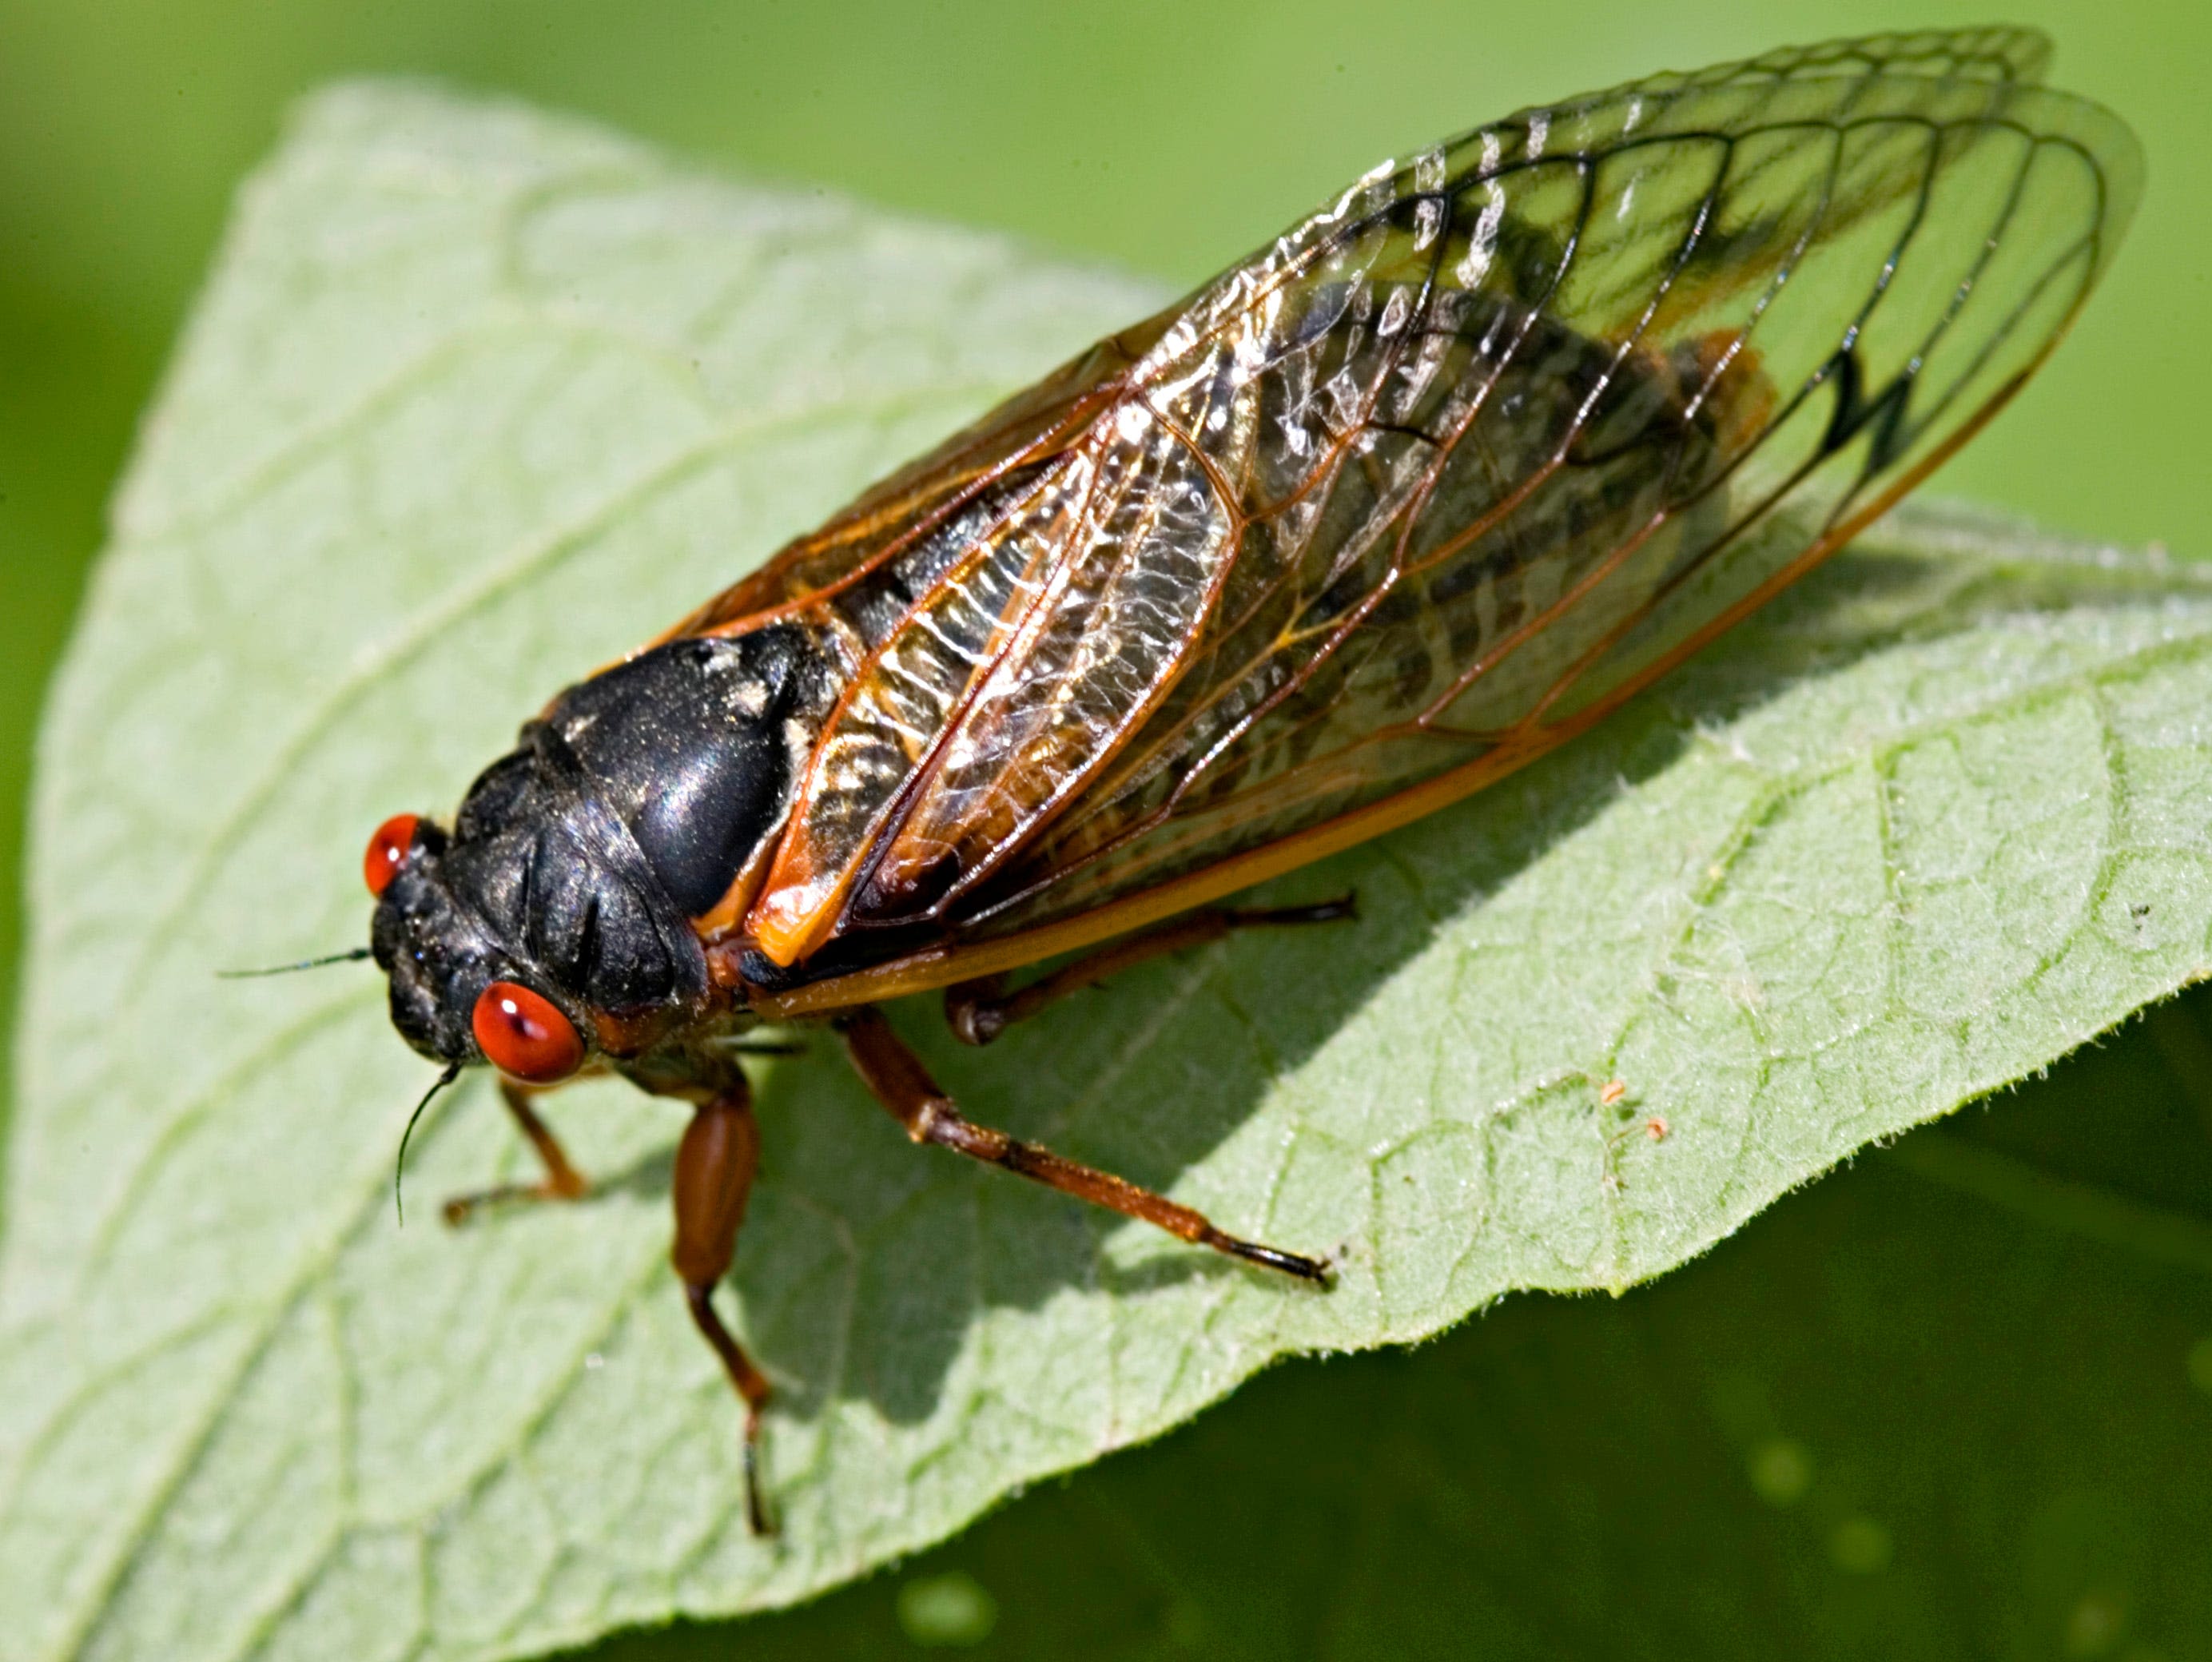 Tons of cicadas will emerge in Wisconsin soon. Here's how to protect your plants and gardens